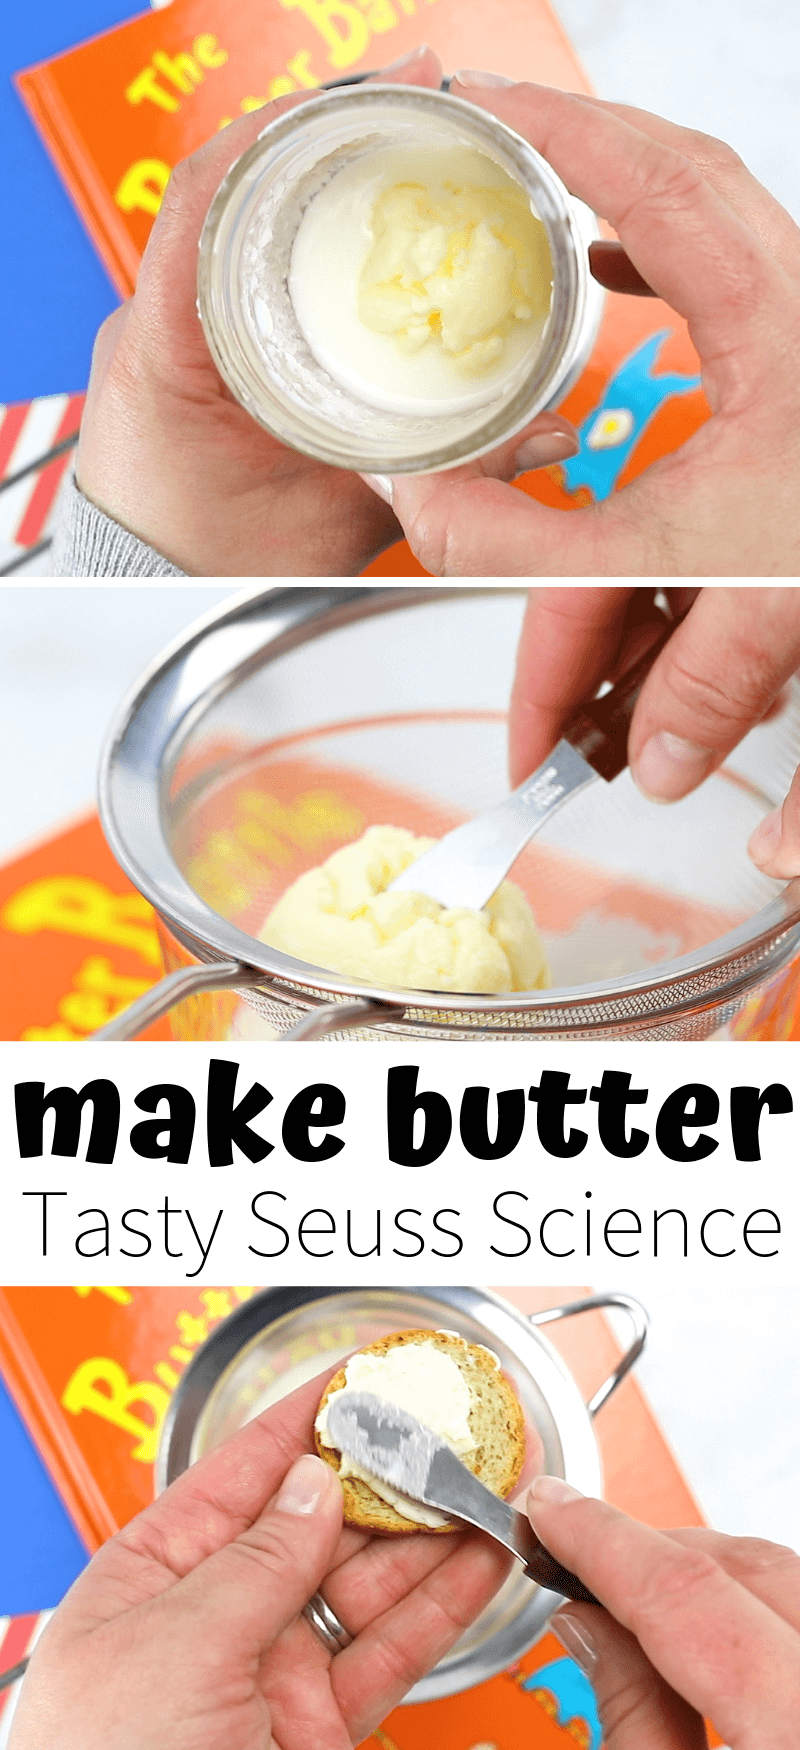 How to make butter in a jar. Also great for Dr. Seuss science and The Butter Battle Book